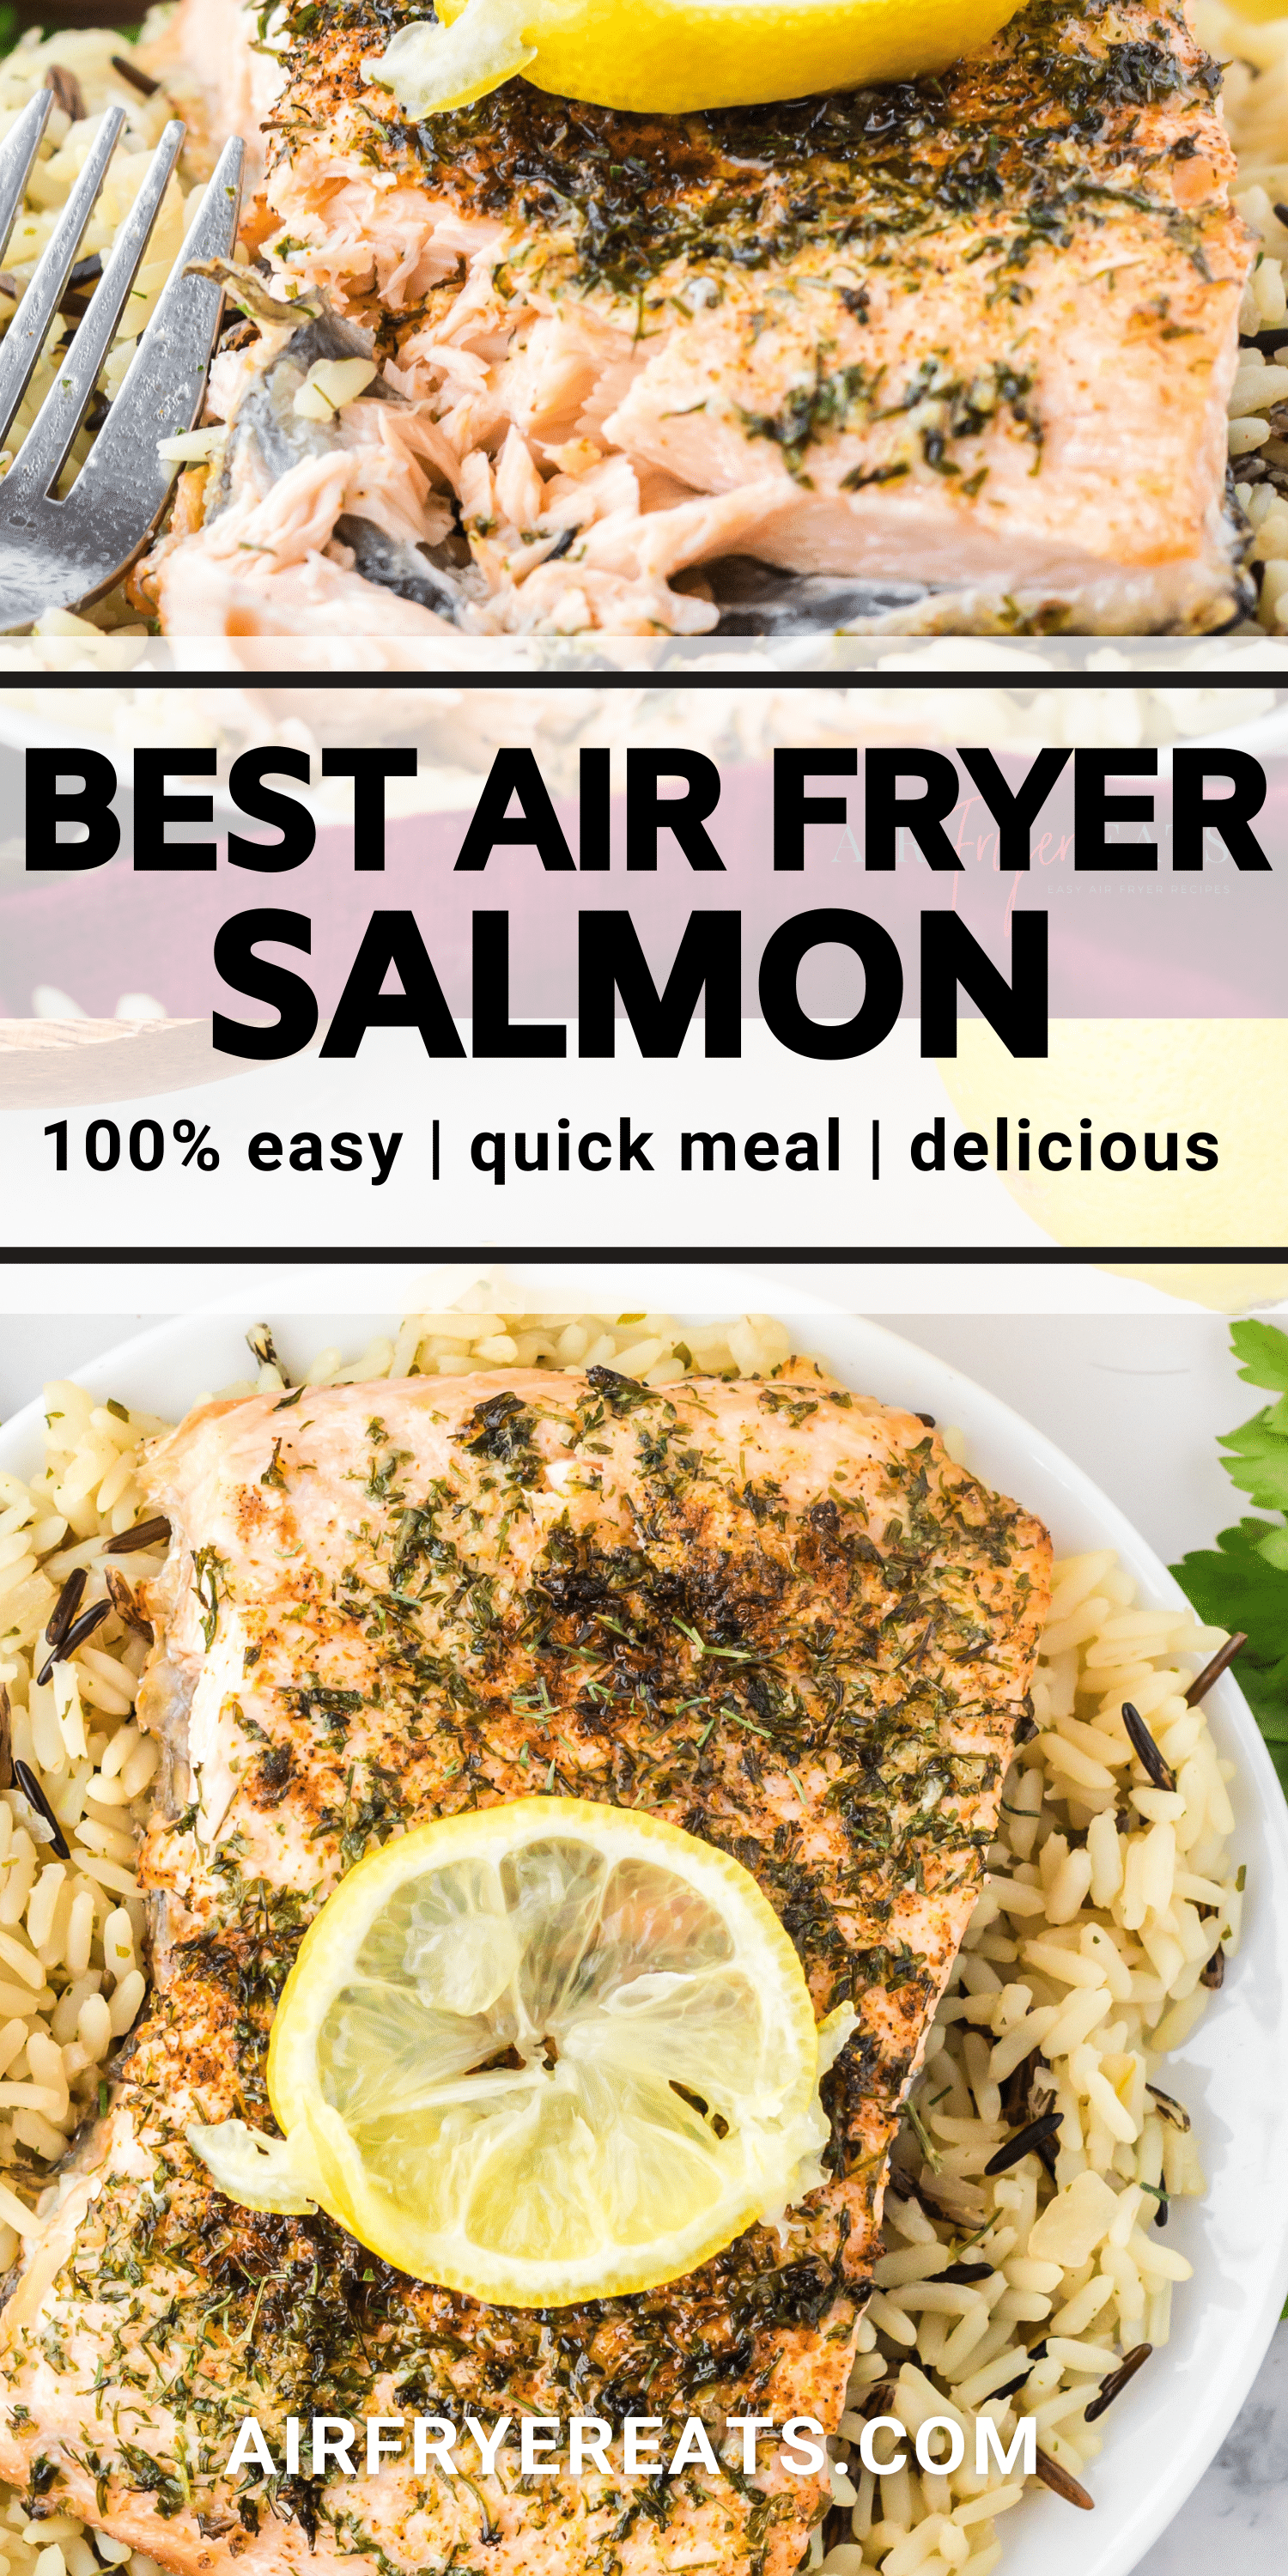 Images of salmon cooked in the air fryer